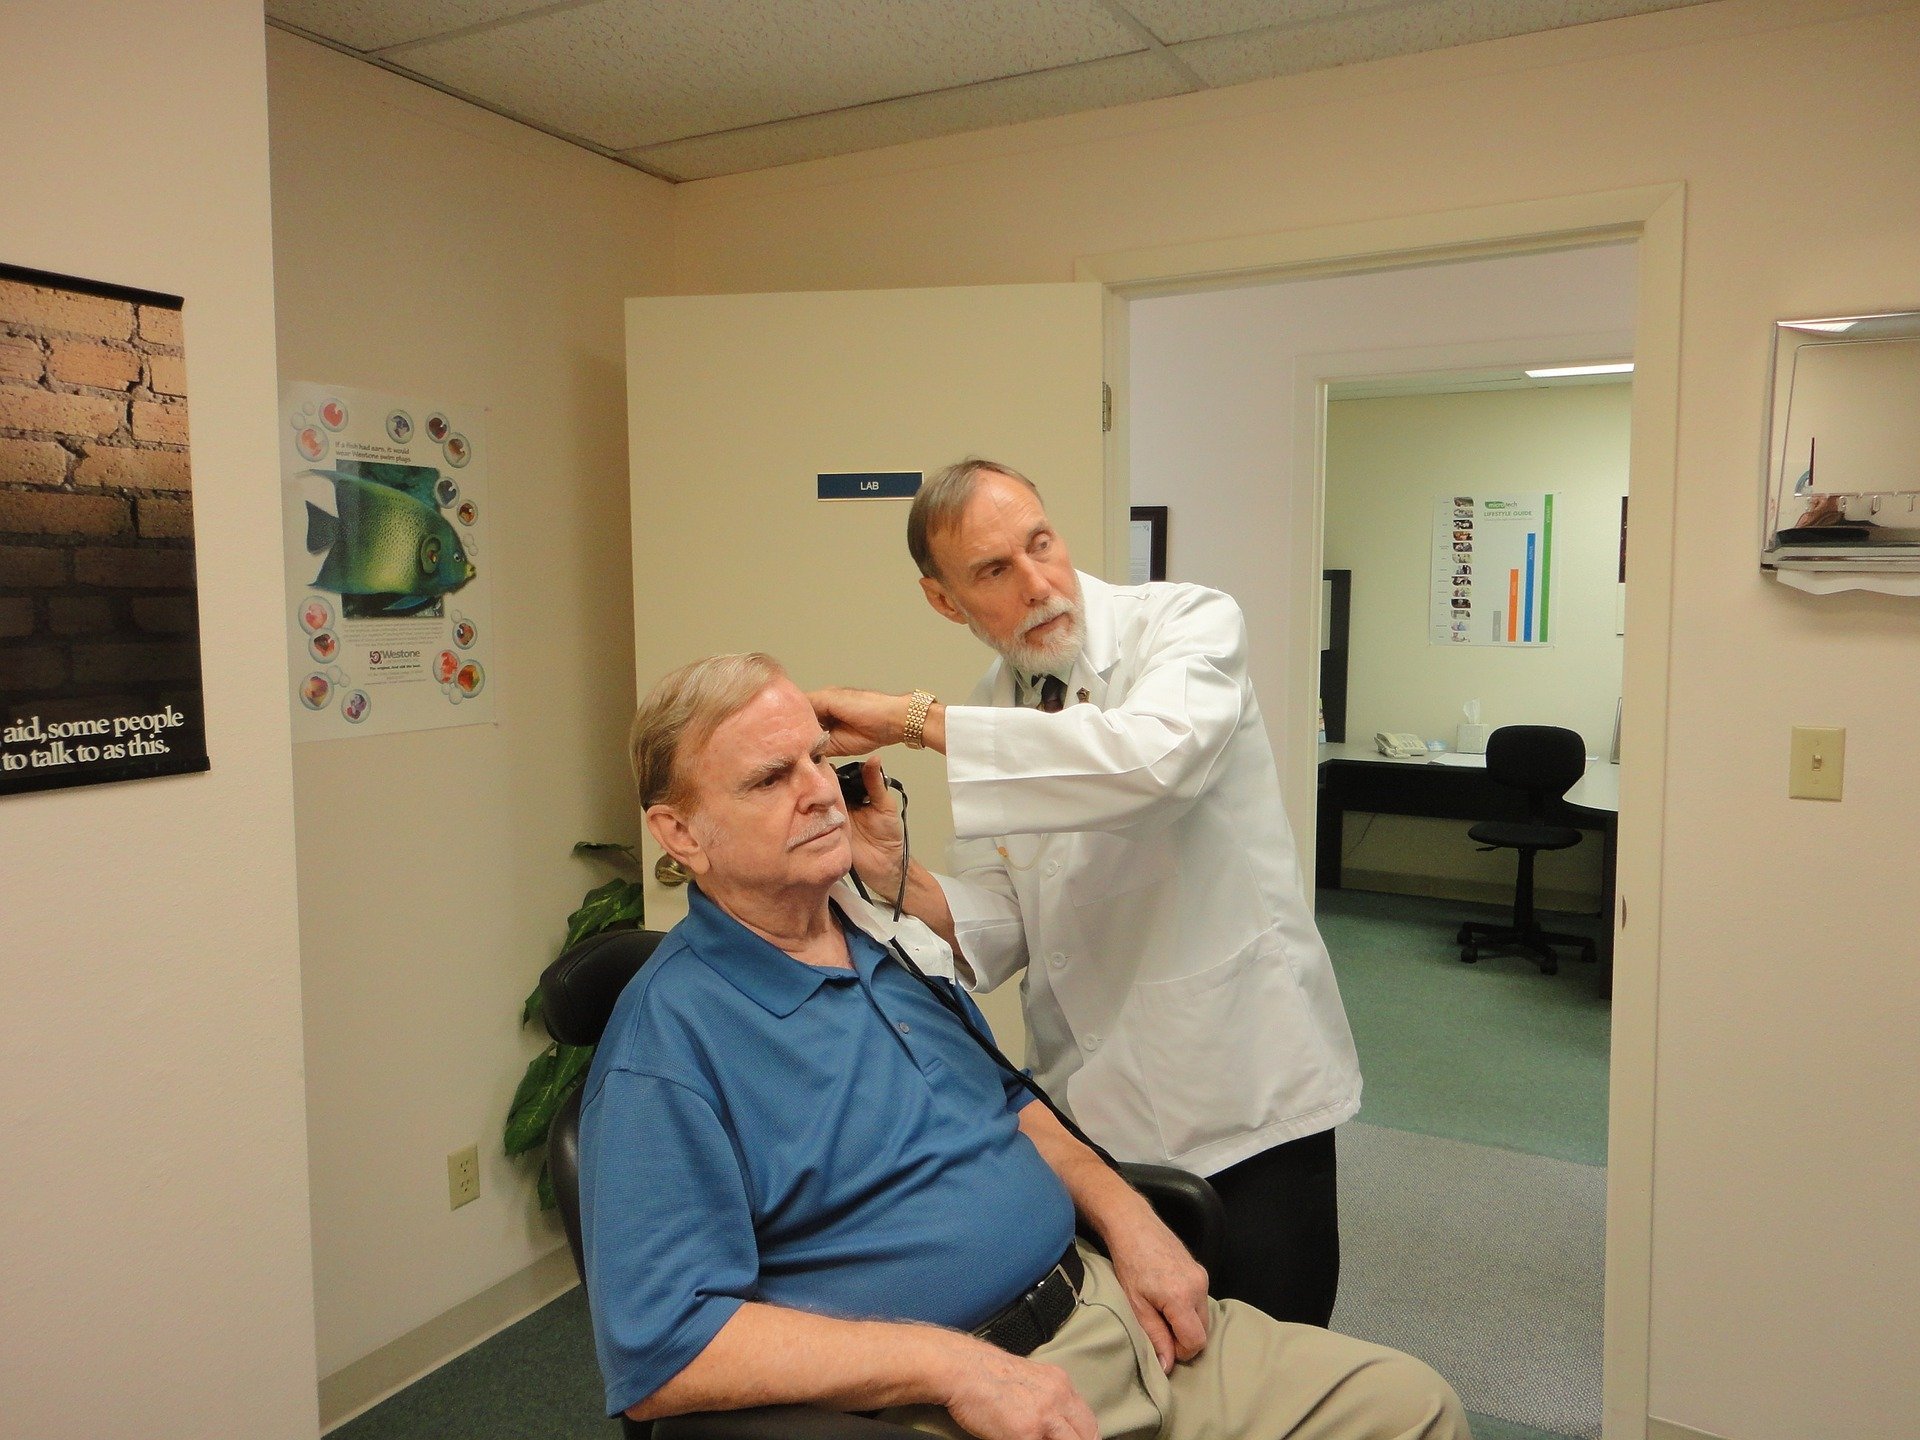 An elderly man having his ears tested by a doctor | Photo: Pixabay/williamsje1